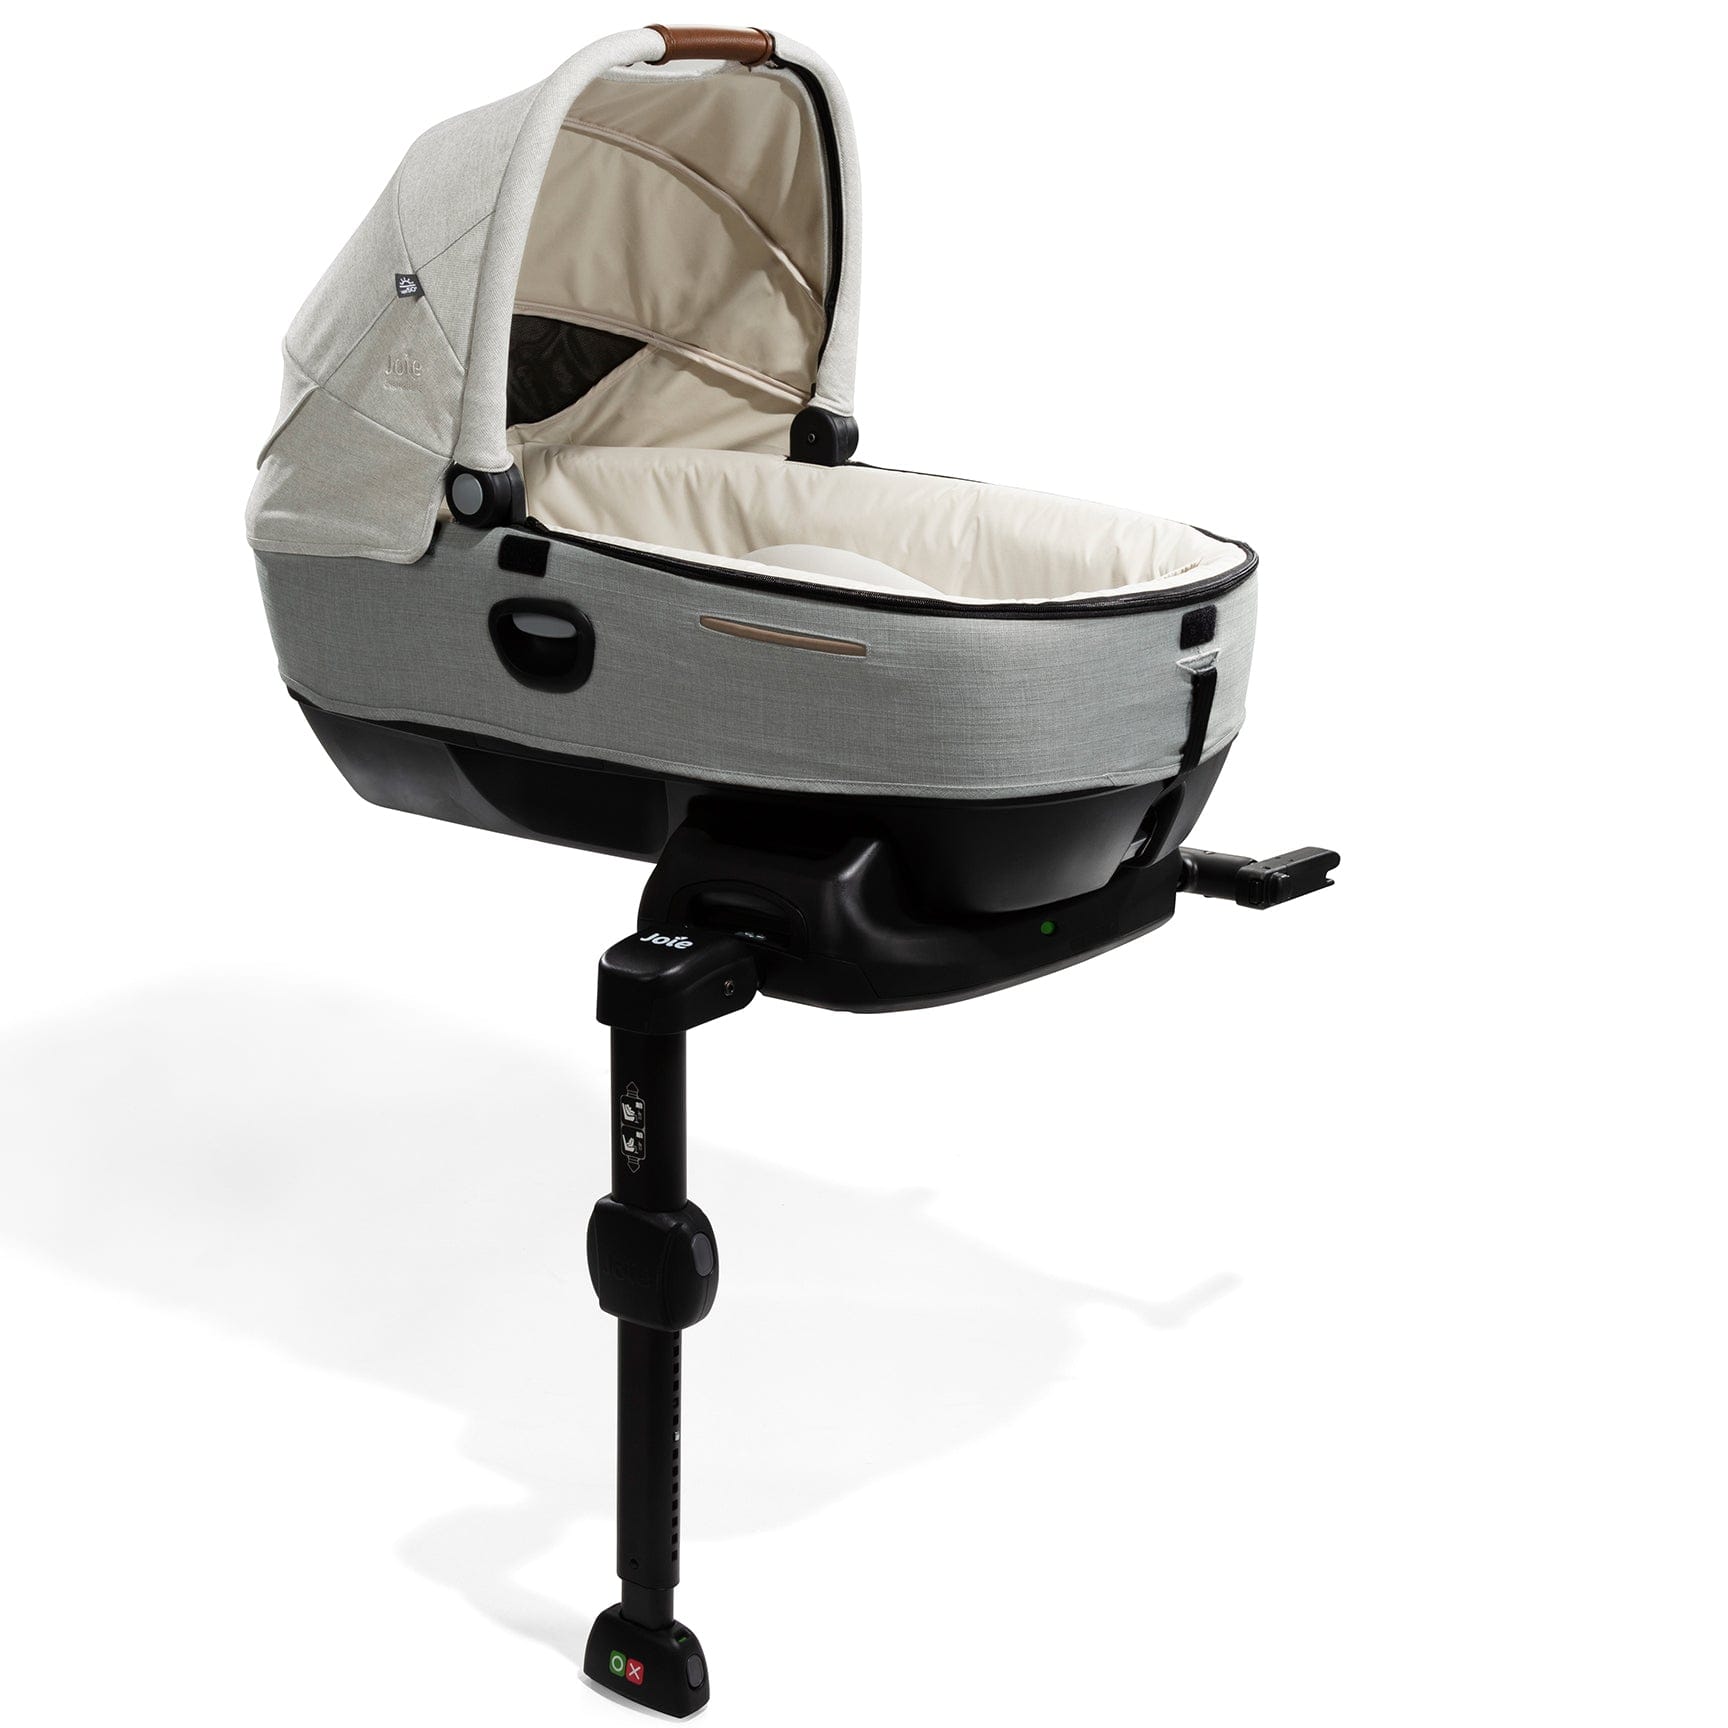 Joie Calmi Car Cot Bed & I-Base Encore in Oyster 0-76 cm (Infant carriers) 12219-OYS 5056080612423